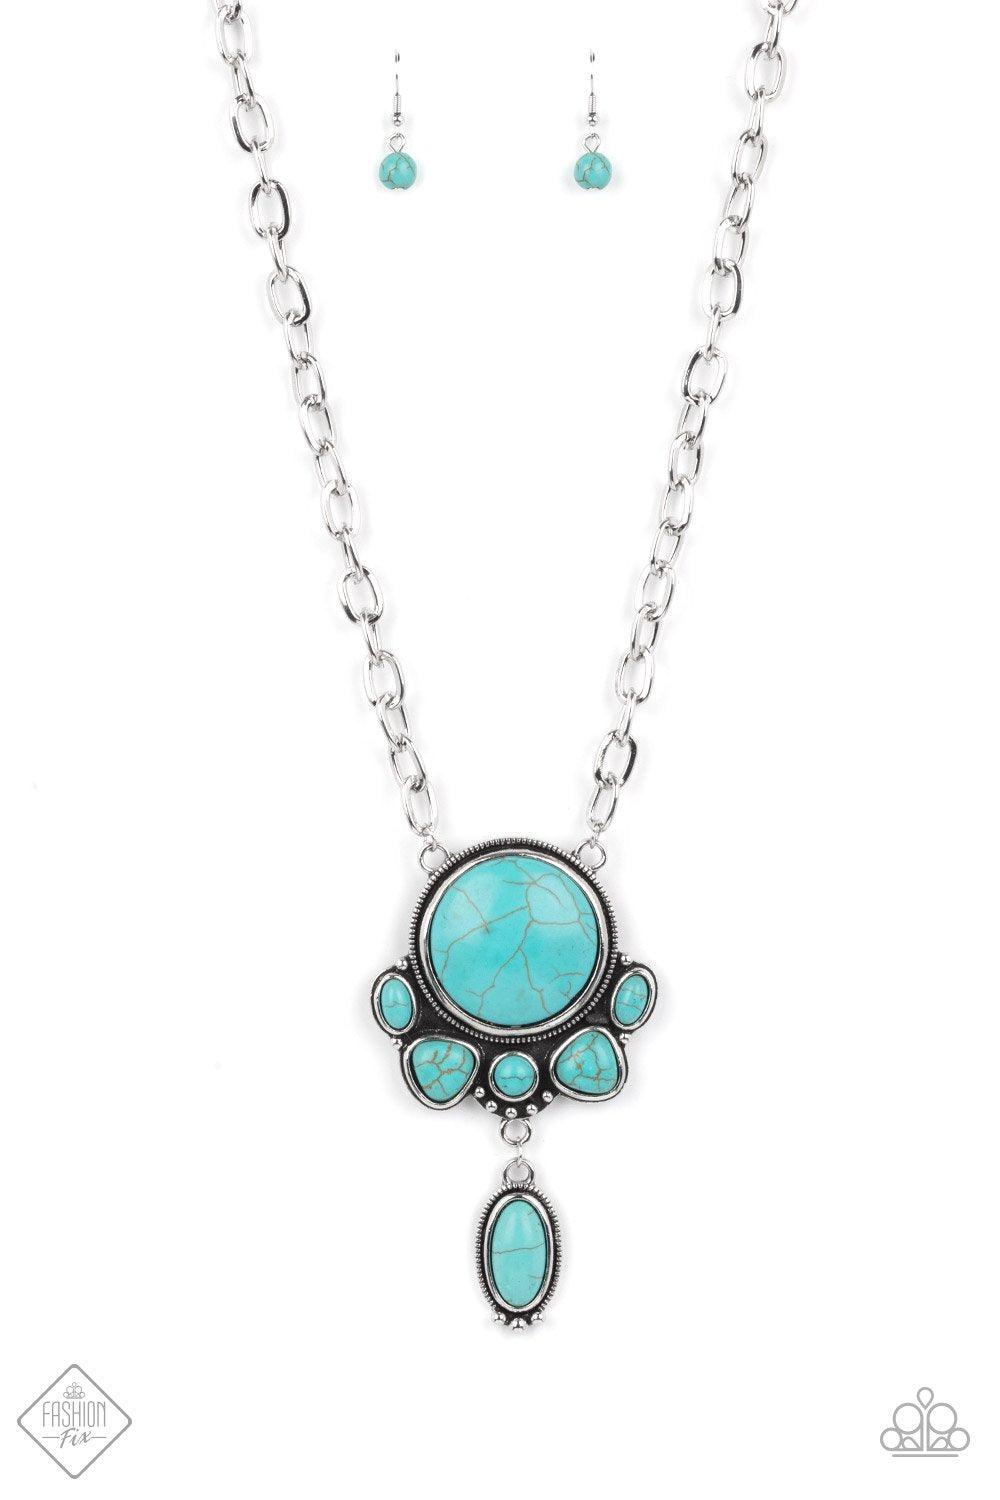 Geographically Gorgeous Turquoise Blue Stone and Silver Necklace - Paparazzi Accessories - lightbox -CarasShop.com - $5 Jewelry by Cara Jewels